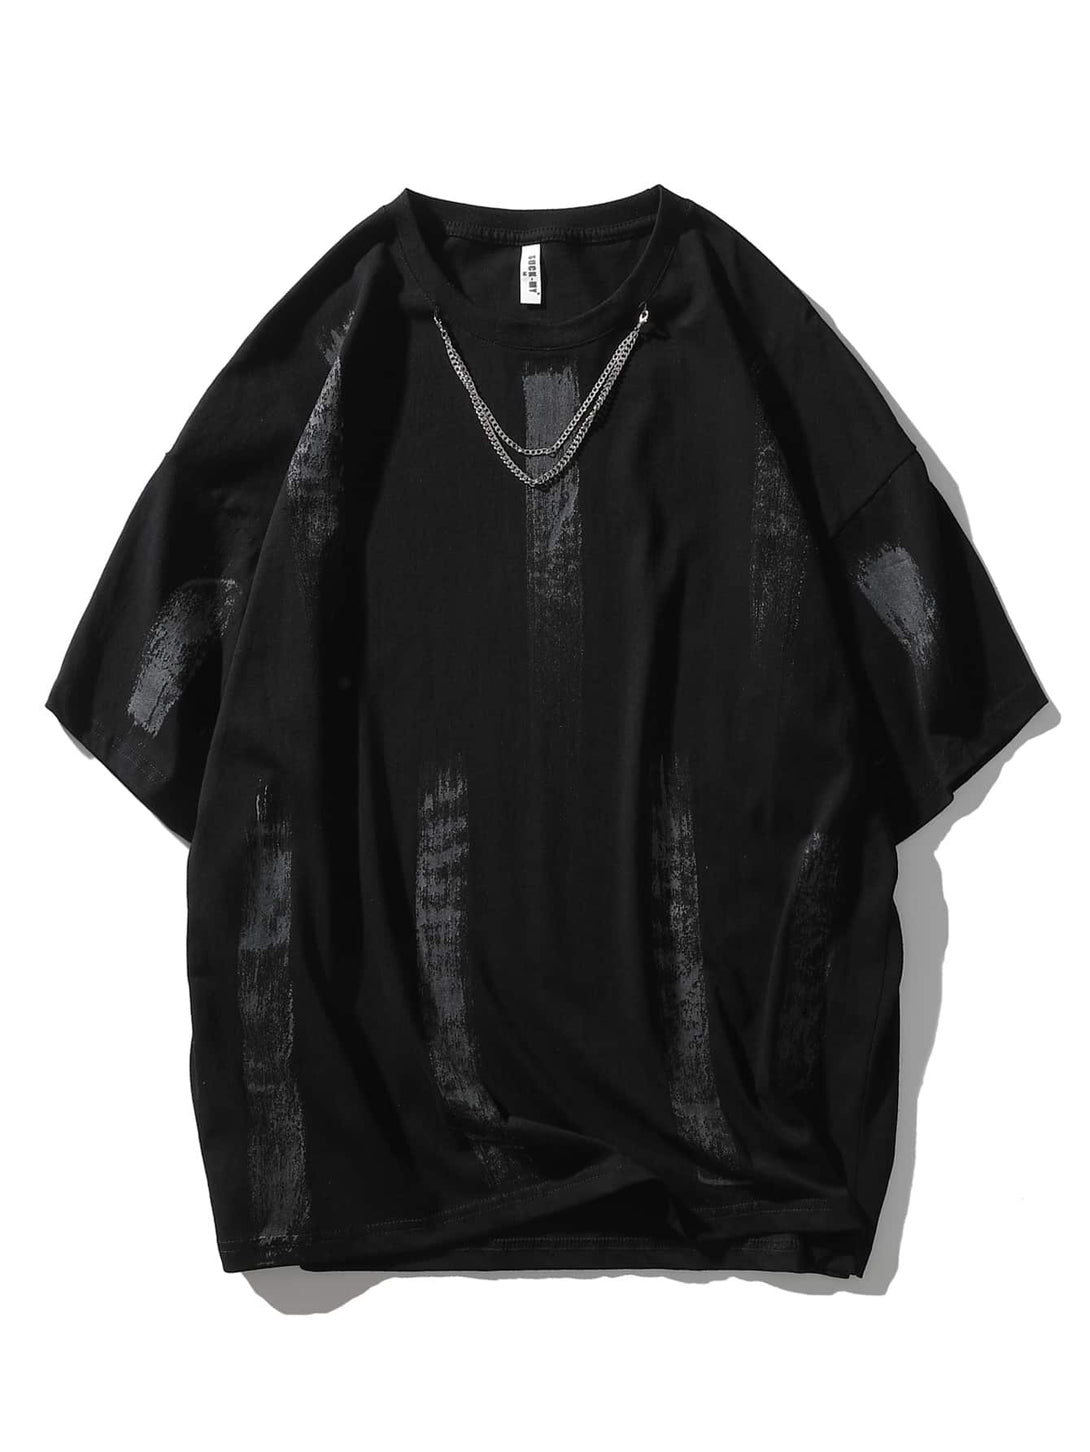 SHEIN Brush Print with Chain Detail Tee - Negative Apparel